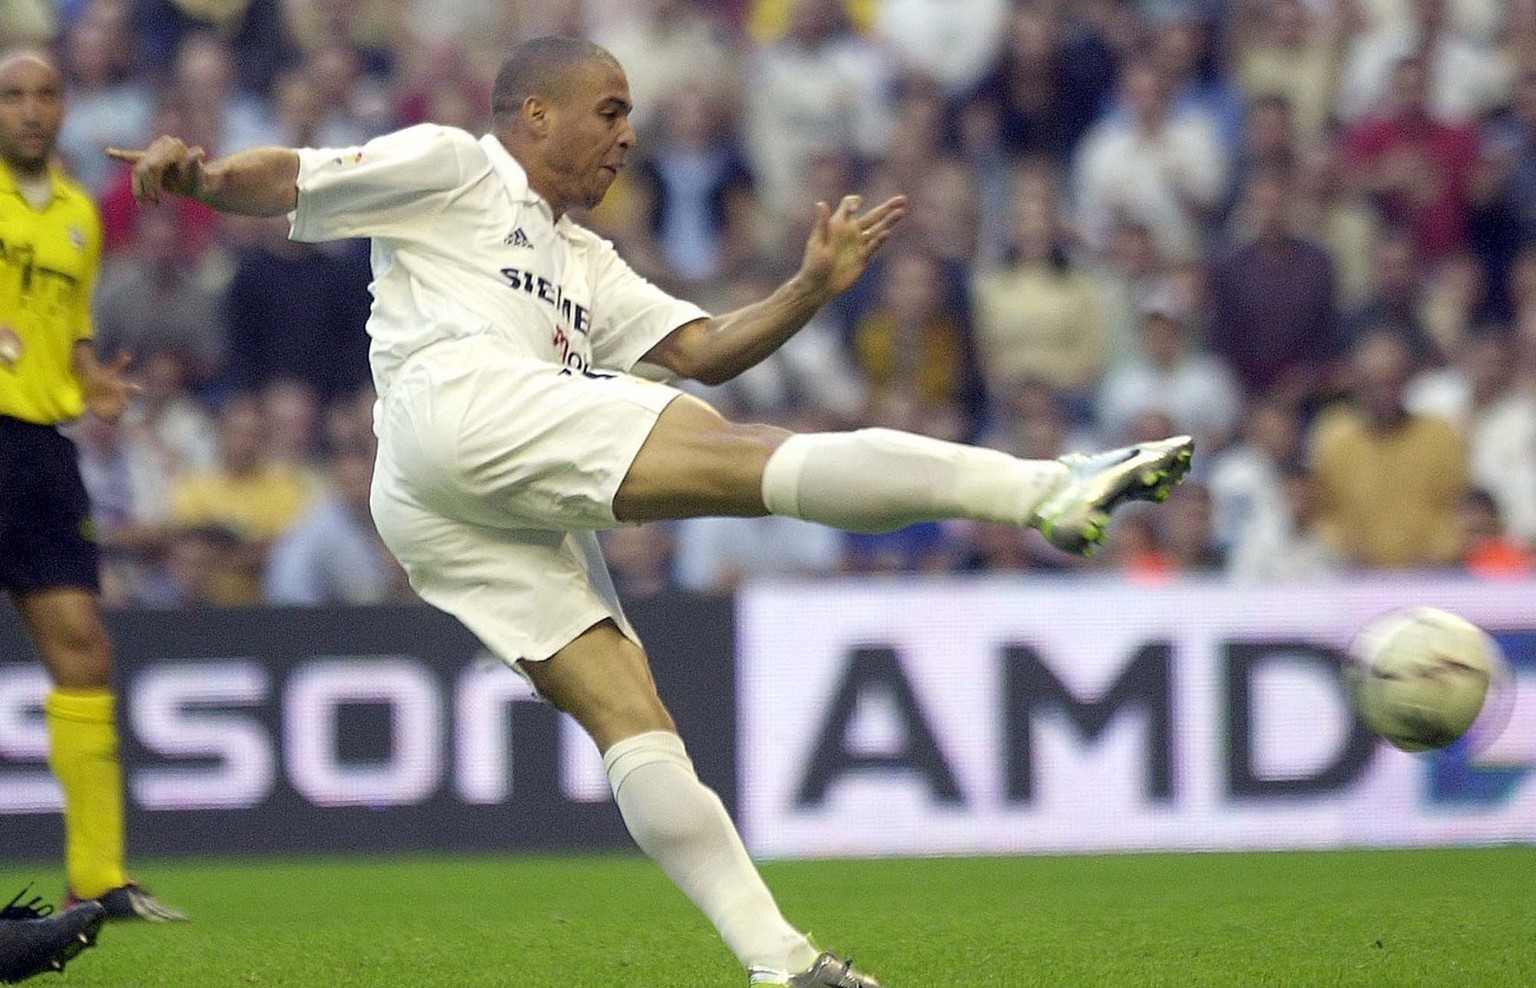 Real Madrid&#039;s Brazilian star Ronaldo scores his first goal on his debut against Alaves during a Spanish league soccer match in Madrid&#039;s Bernabeu stadium, Spain, Sunday Oct. 6, 2002. (AP Phot ...